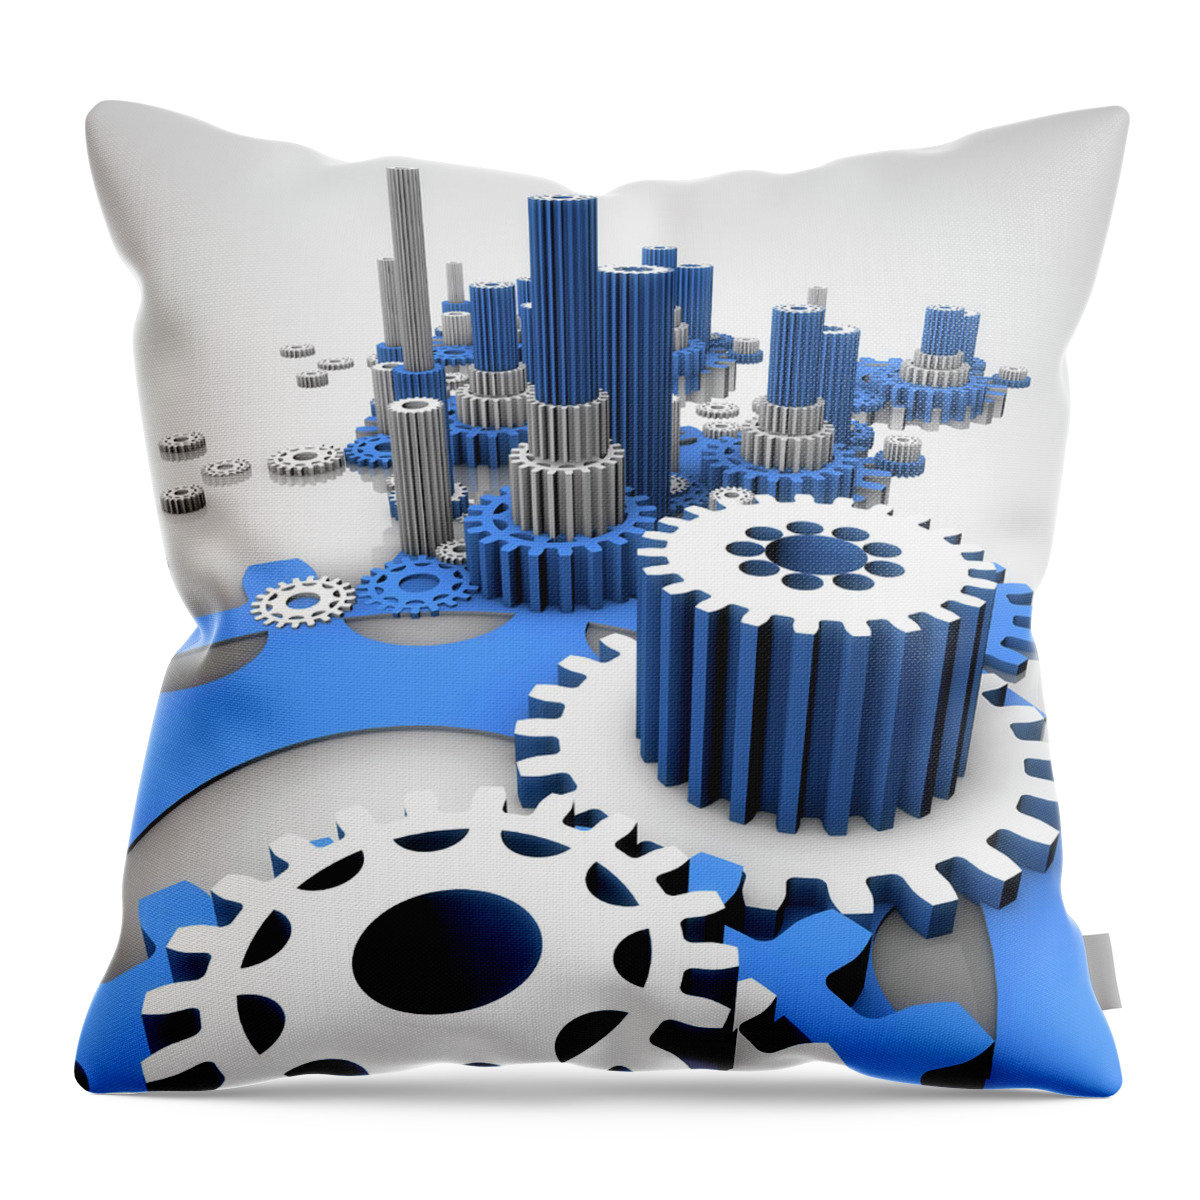 Abstract Throw Pillow featuring the photograph Three Dimensional Blue And White Cogs #2 by Ikon Ikon Images